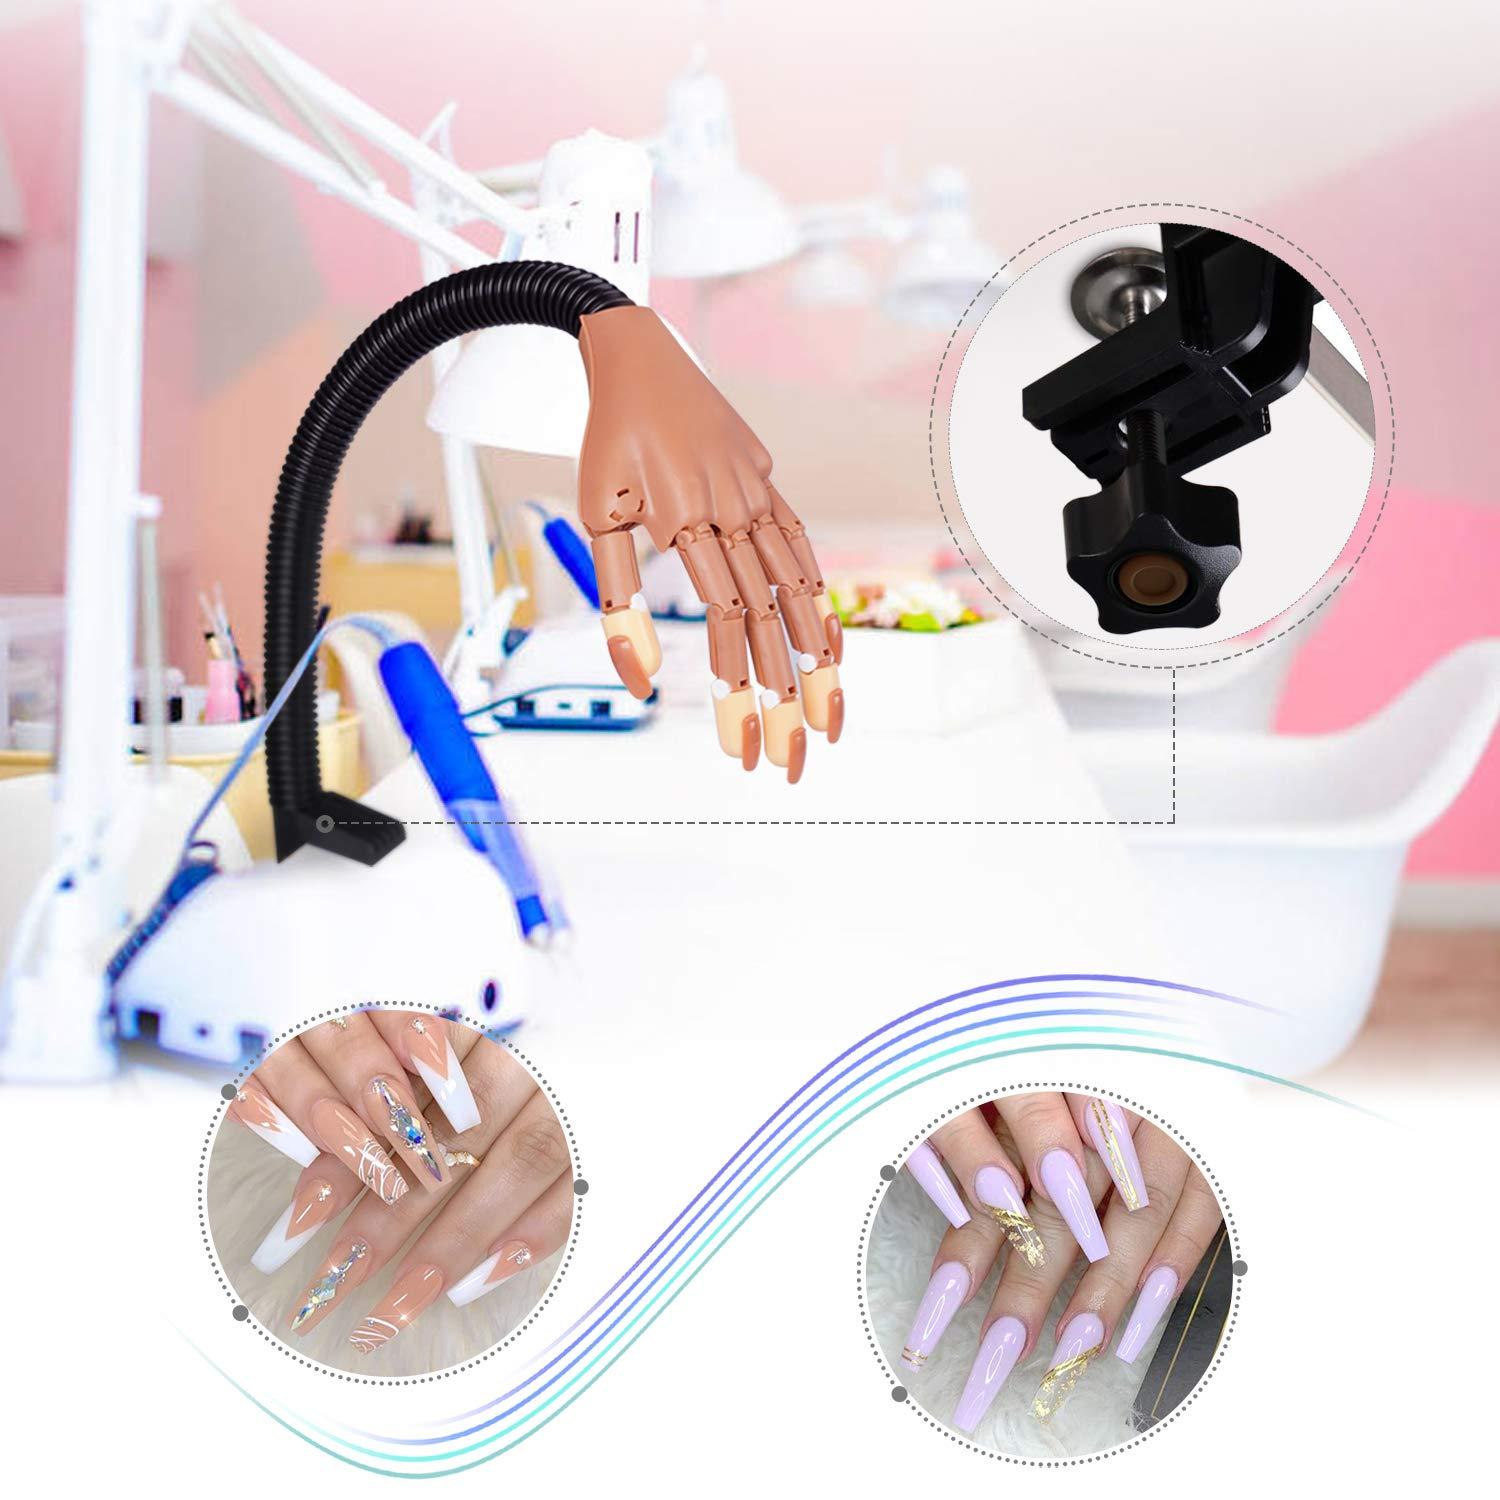 Nail Practice Hand for Acrylic Nails - HoMove Flexible Movable Nail  Training Mannequin Hand Fake Hands to Practice Nail - Best DIY Manicure  Starter Kit with 300…